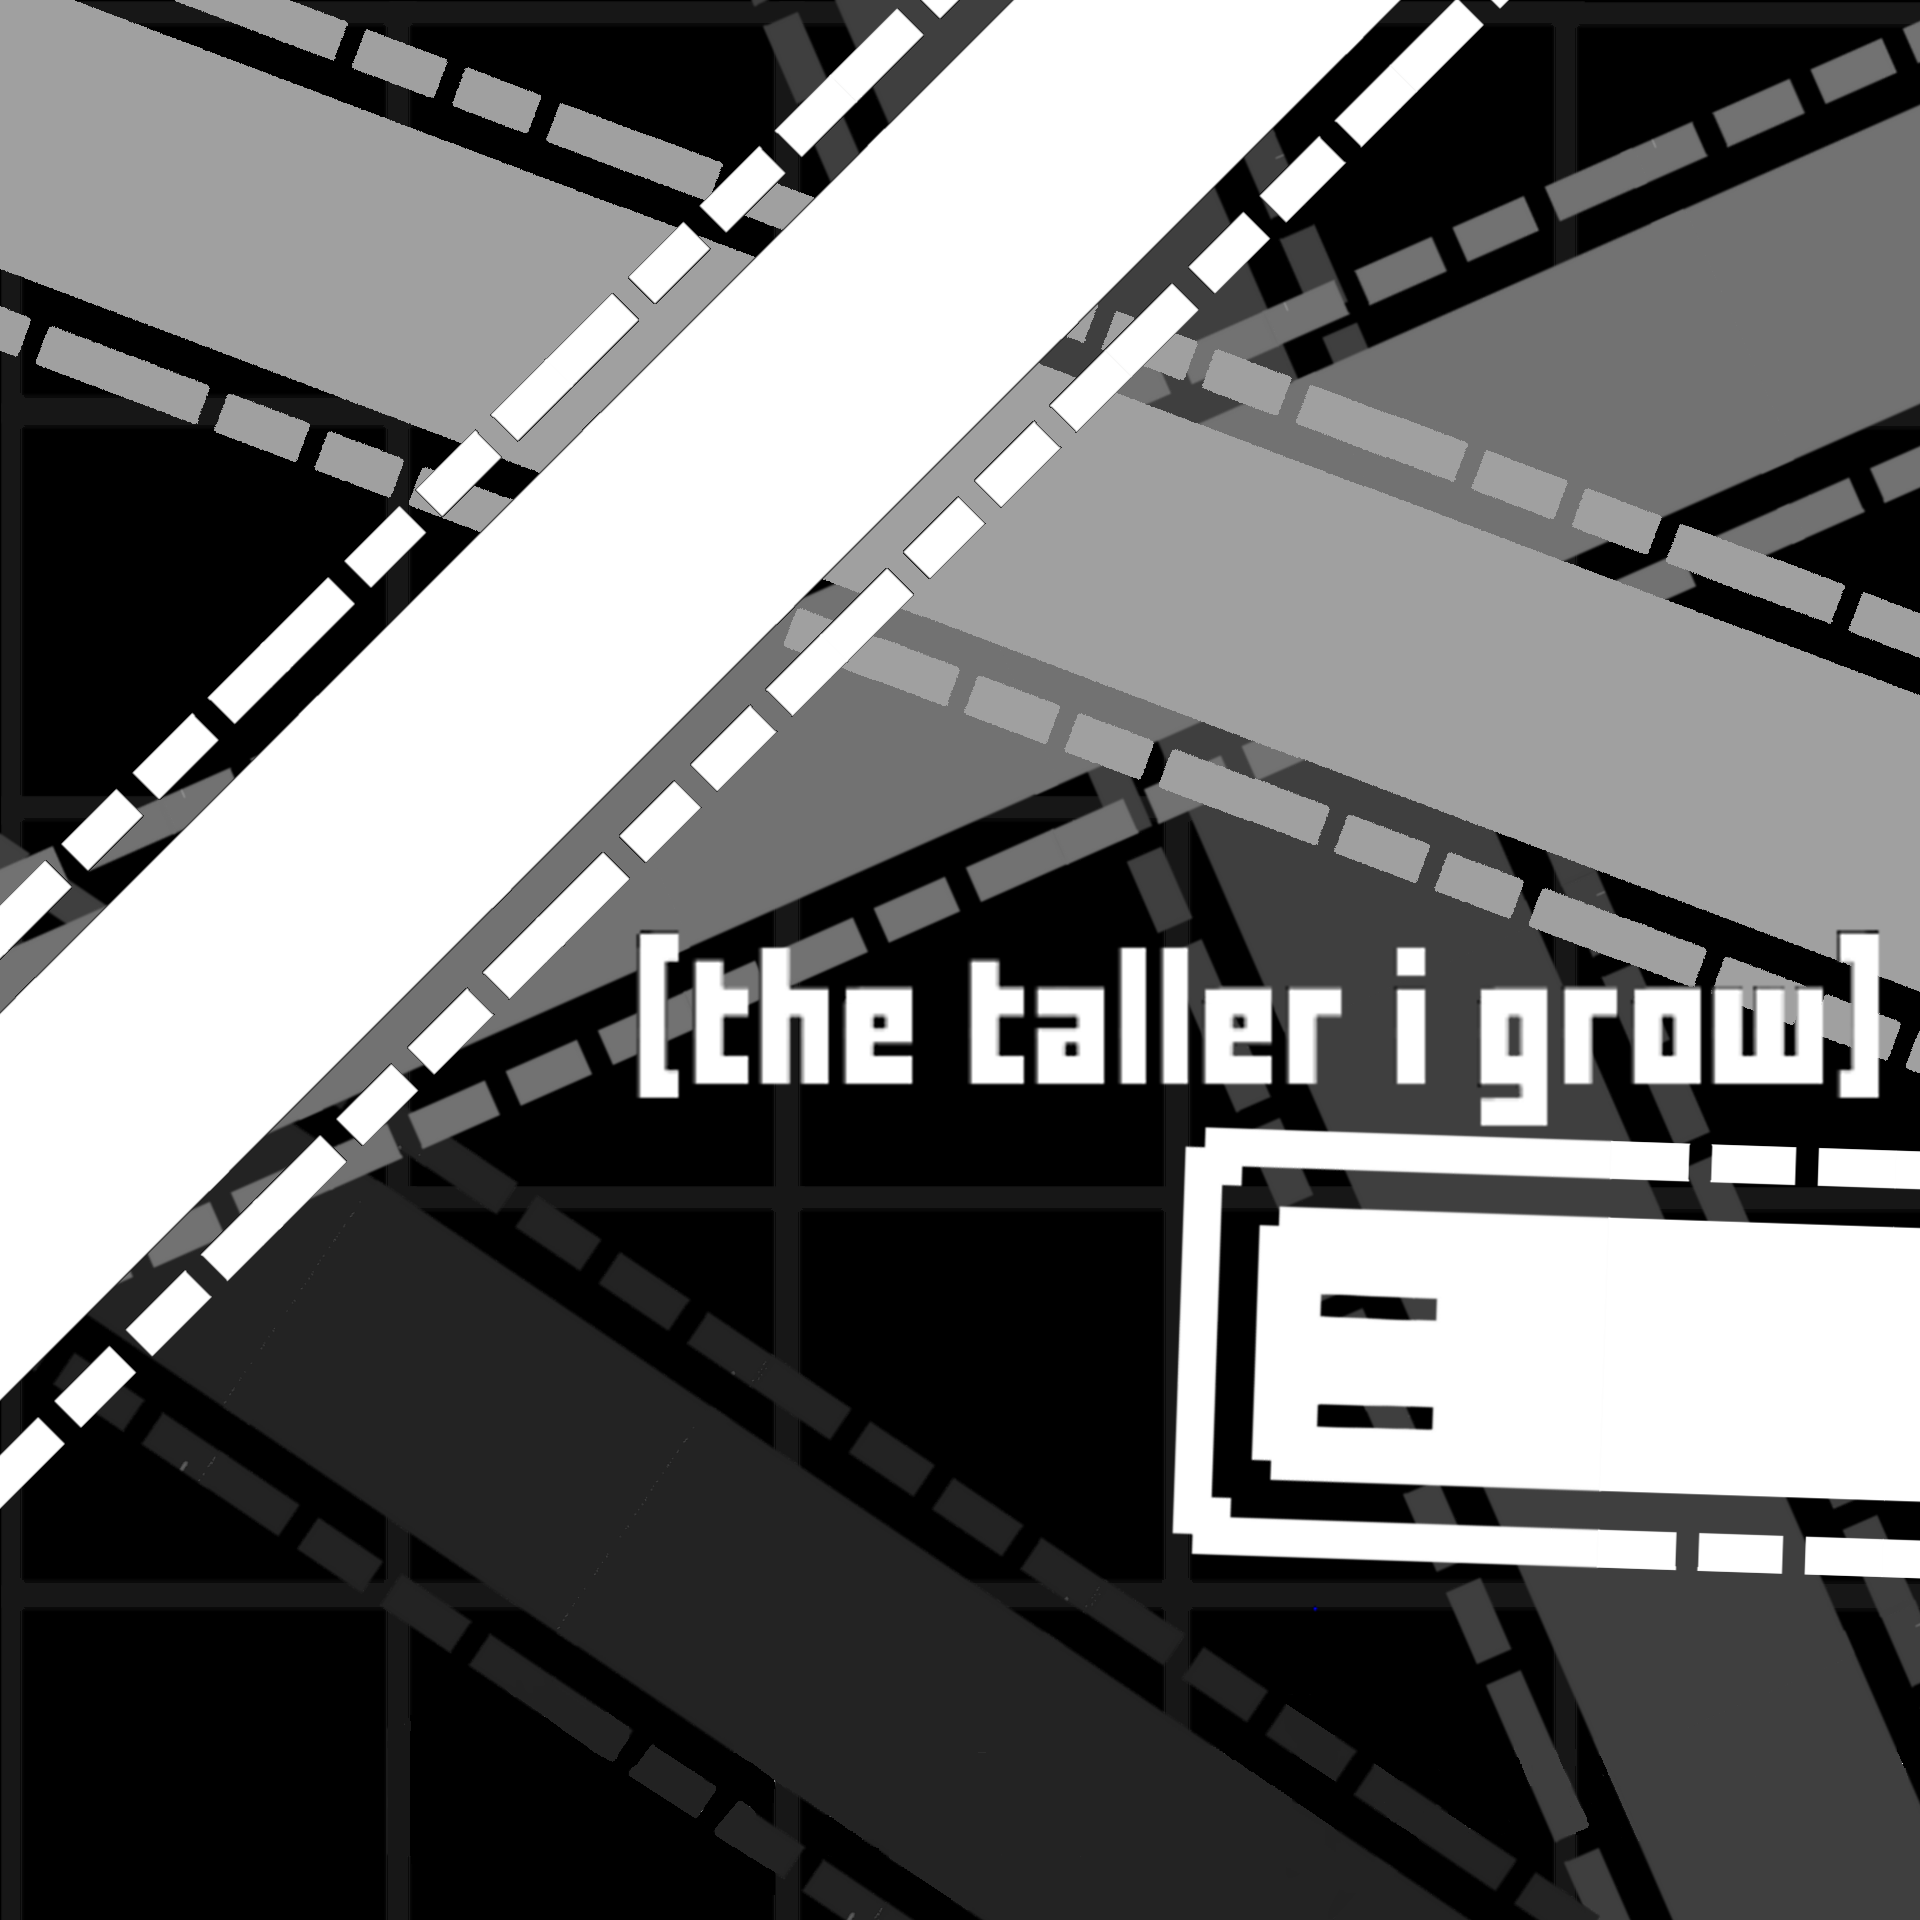 Released my first game not long ago called The Taller I Grow, feedback would be appreciated